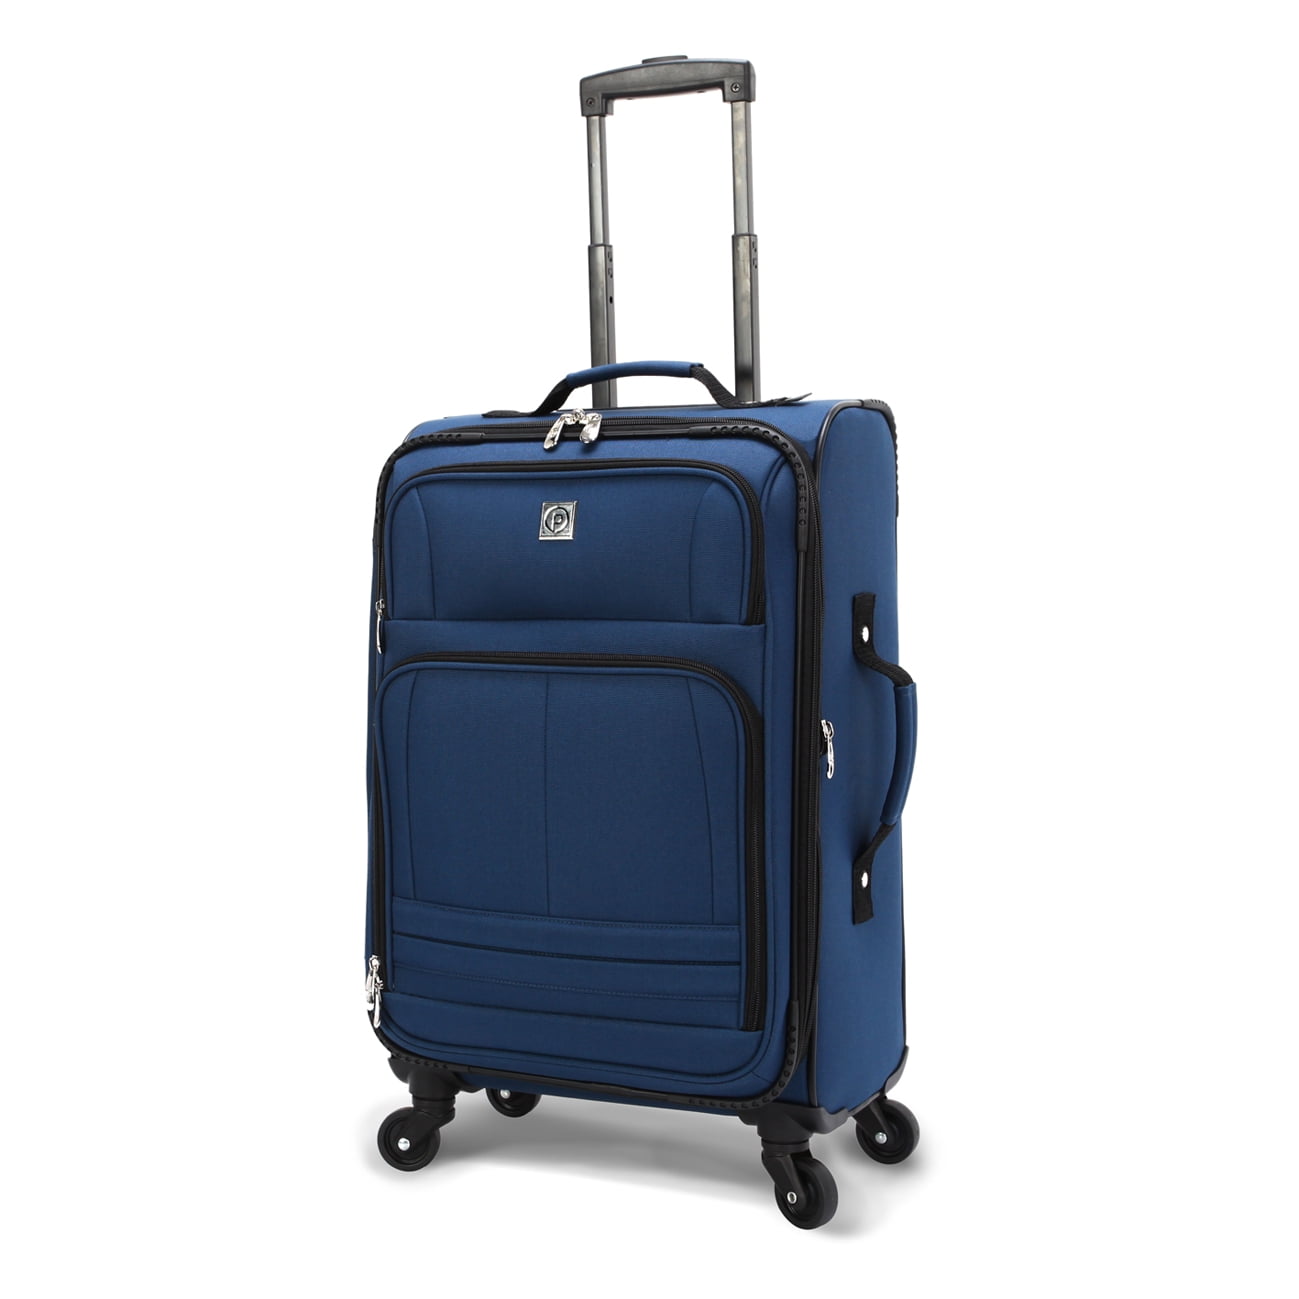 Travelers Club Luggage 20 Personalized Carry On W/360 Degree 4-Wheel System Blue 